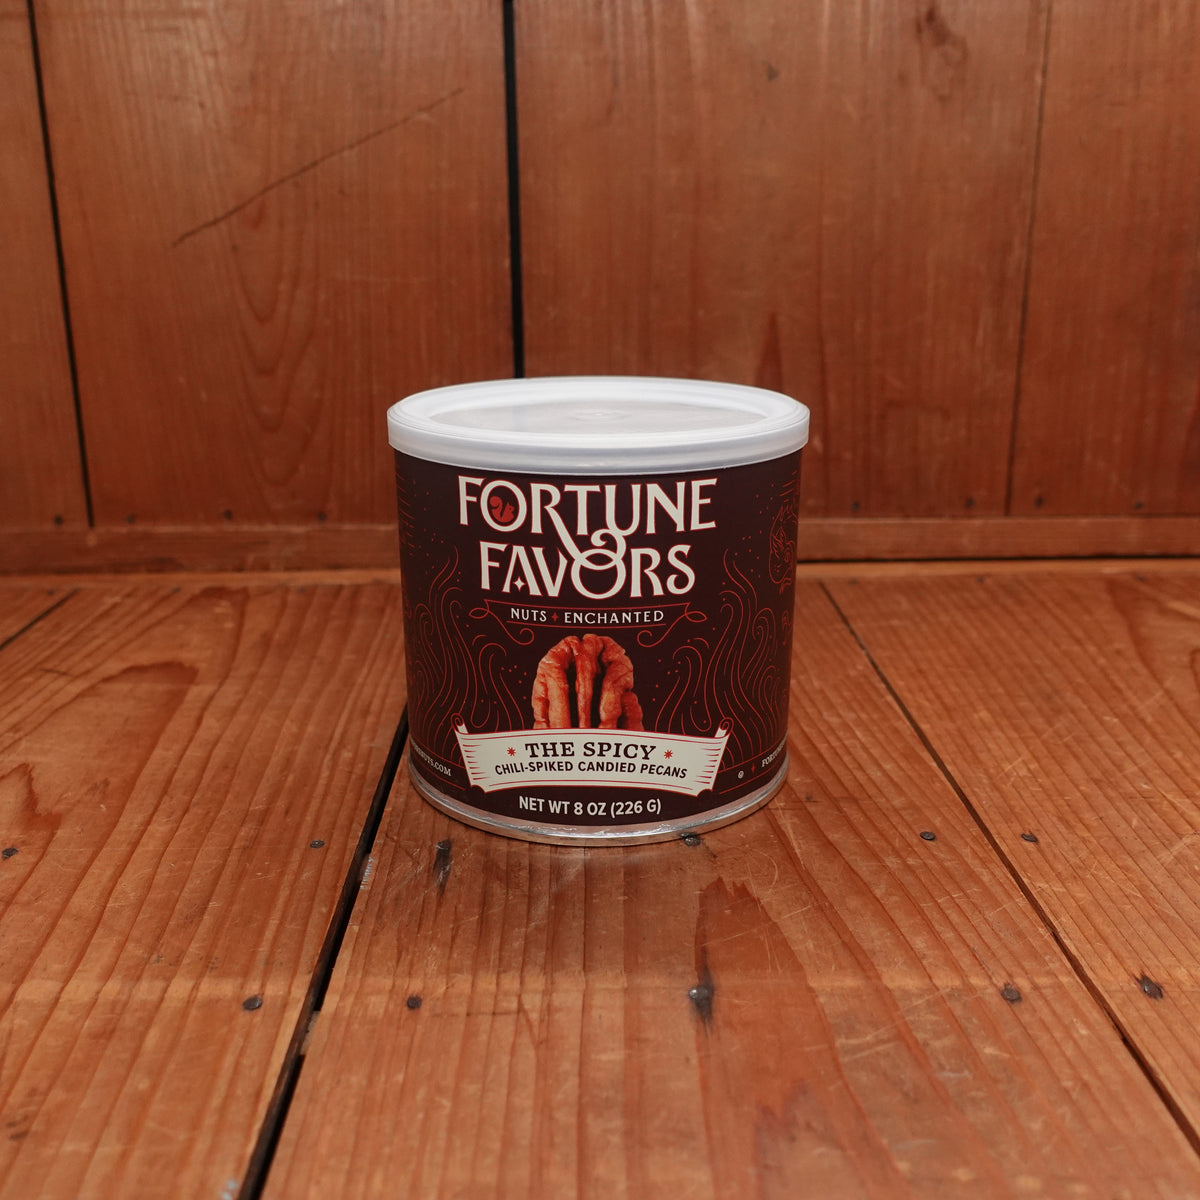 Fortune Favors The Spicy Chili-Spiked Candied Pecans - 8oz